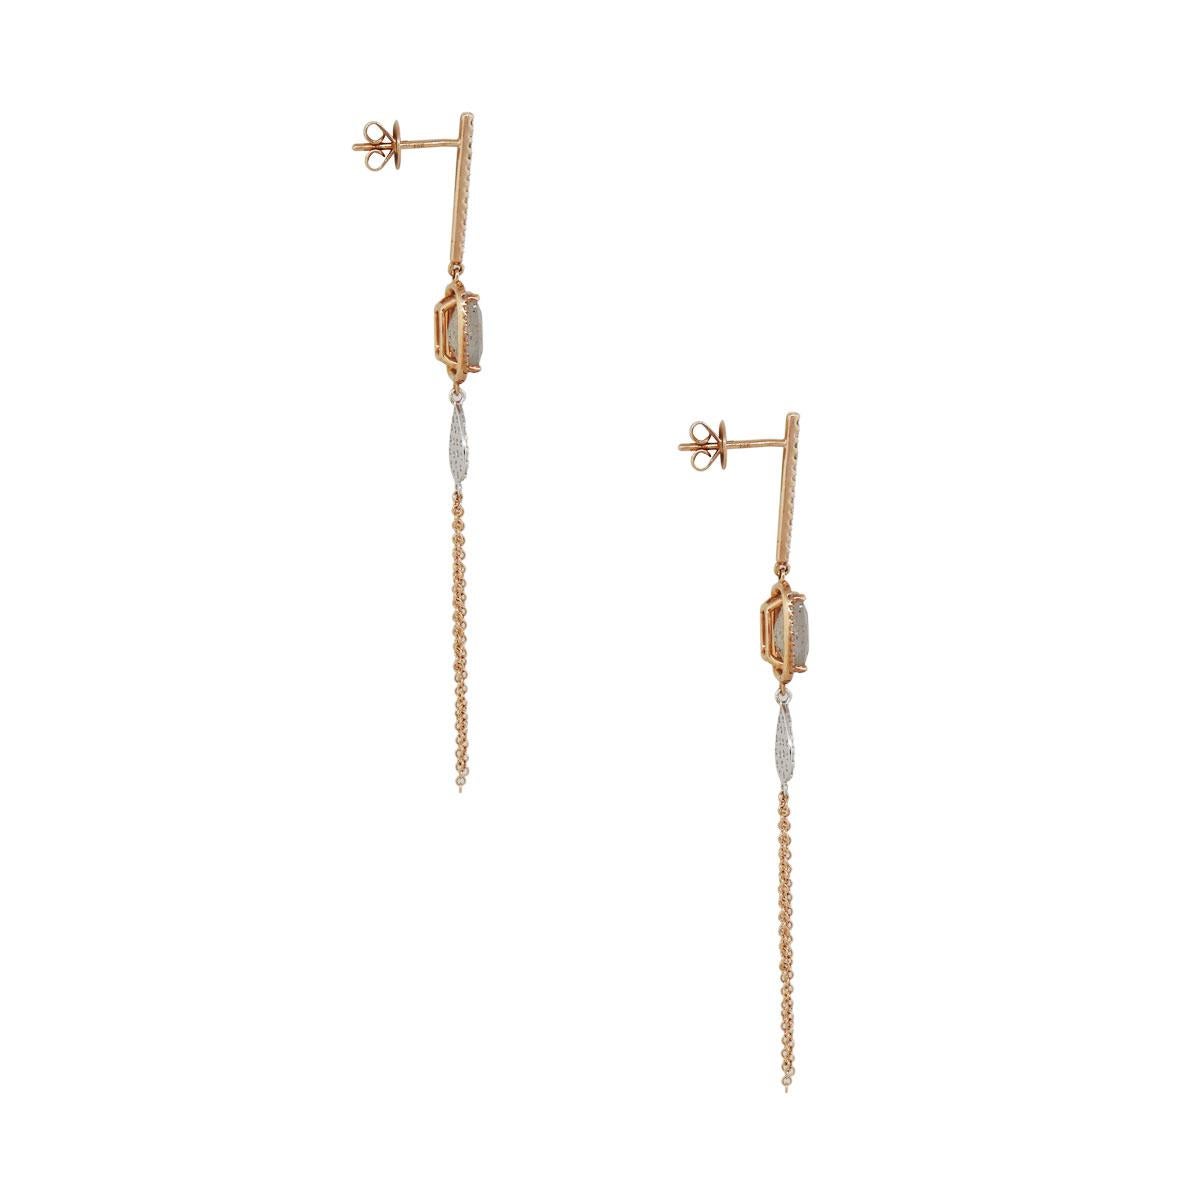 Material: 14k rose gold
Diamond Details: Approximately 0.56ctw of round brilliant diamonds. Diamonds are G/H in color and VS in Clarity
Gemstone Details: Approximately 2.42ctw of labradorite gemstones
Measurements: 2.87″ x 0.18″ x 0.34″
Earring